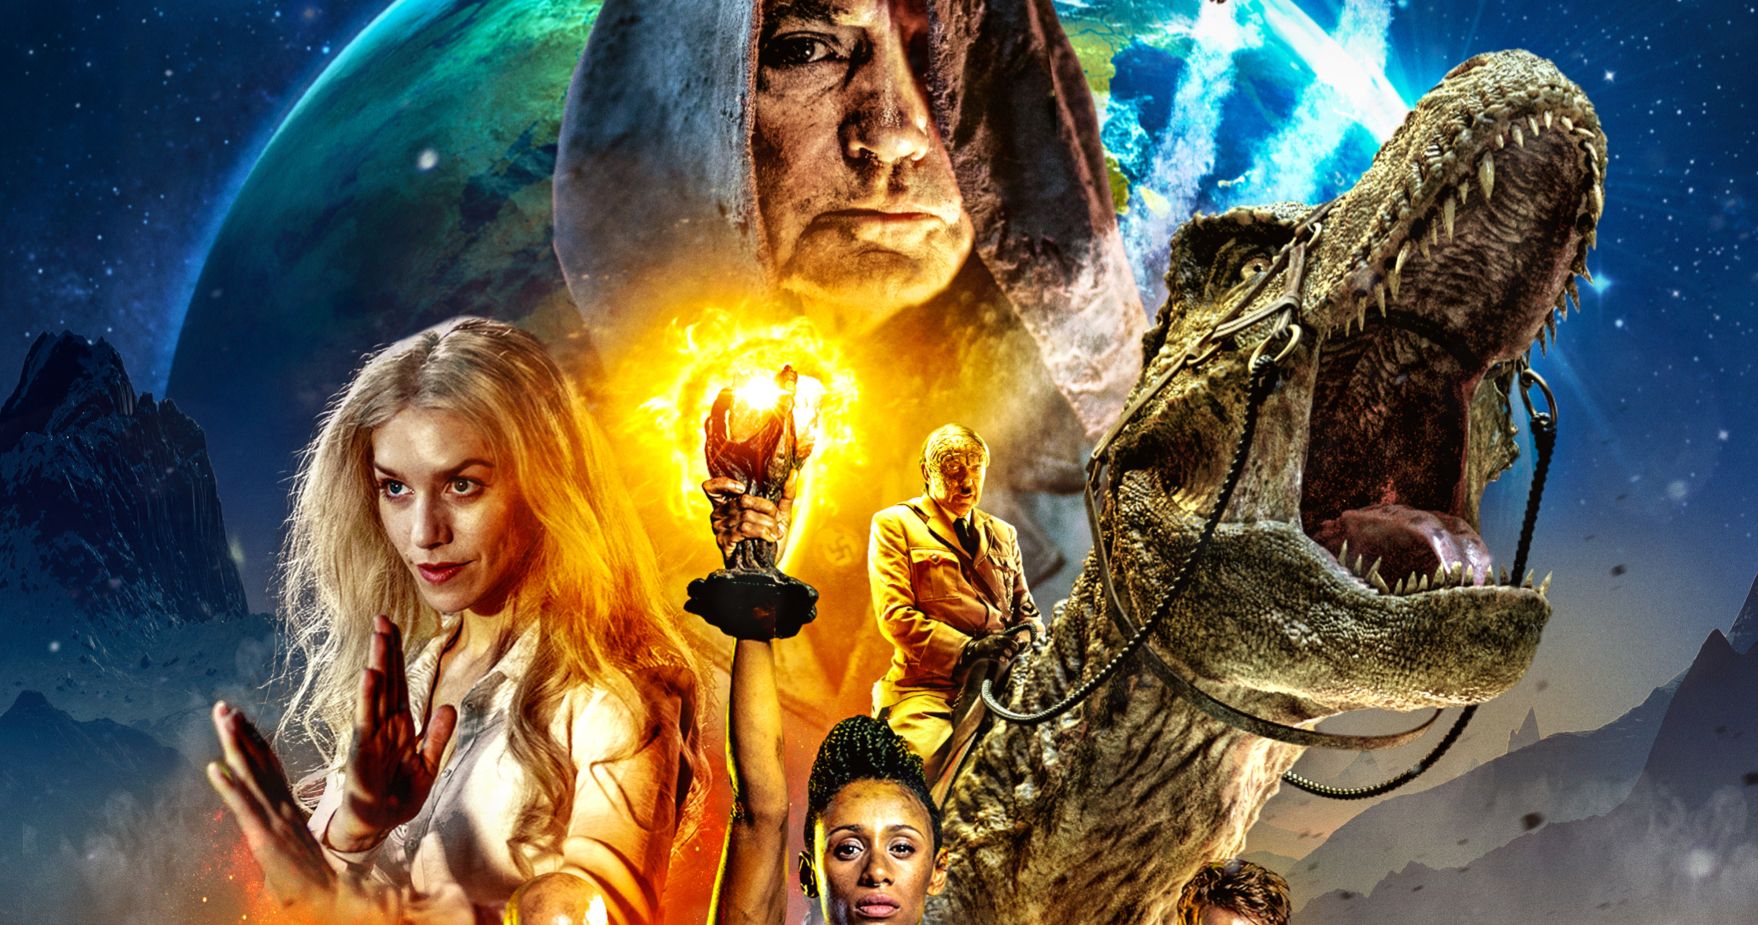 Final Iron Sky: The Coming Race Trailer Goes to War with Dinosaur-Riding Moon Nazis